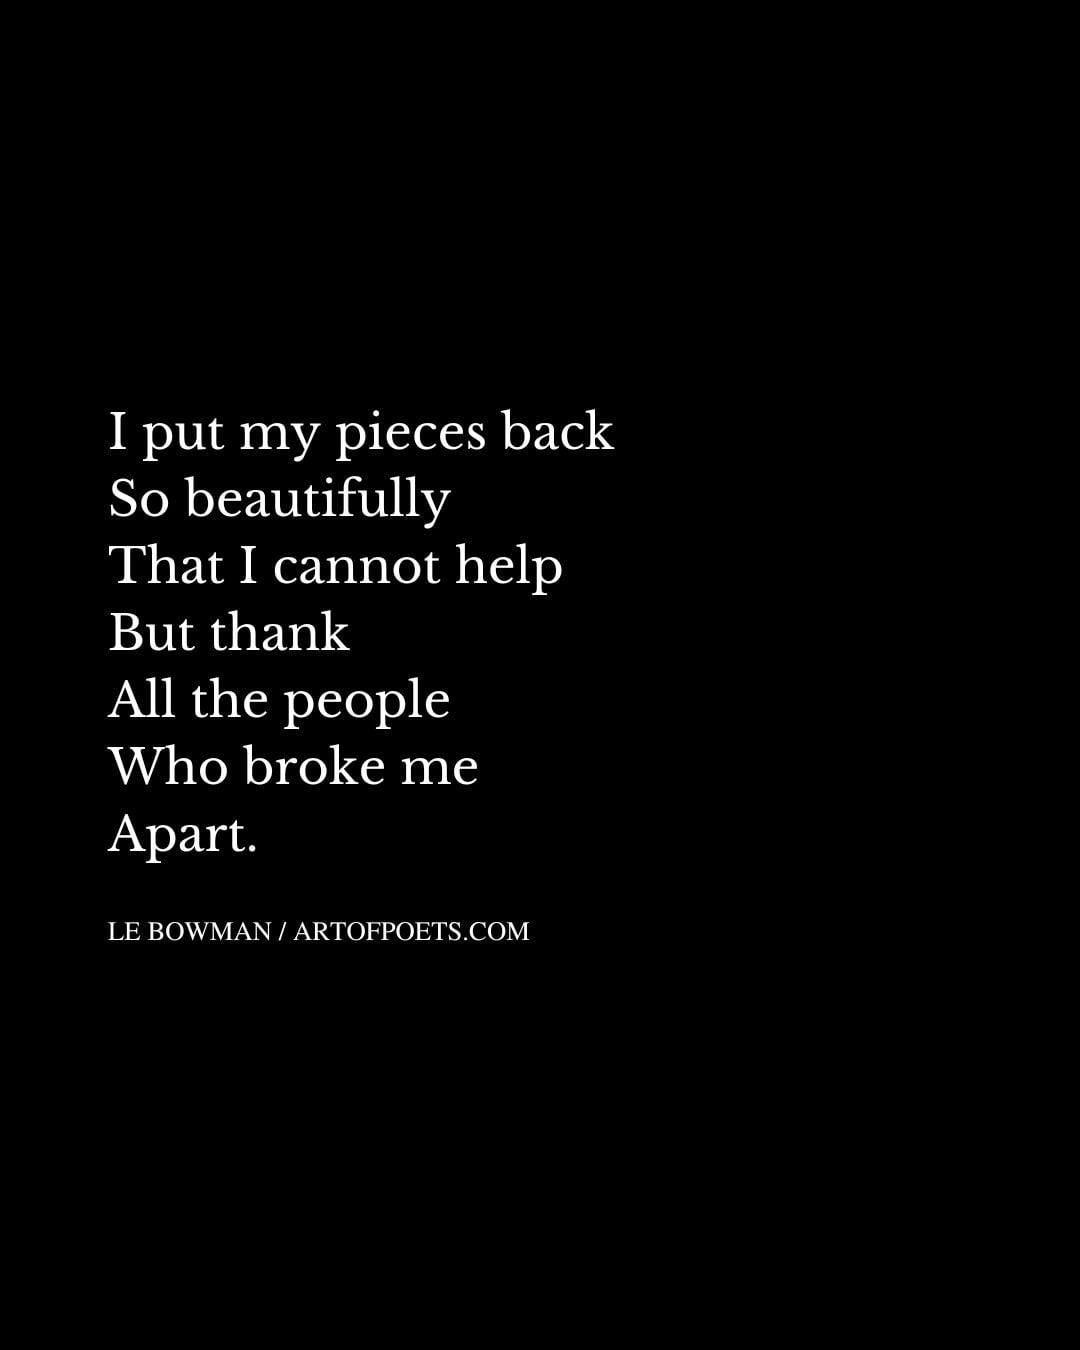 I put my pieces back So beautifully That I cannot help But thank All the people Who broke me Apart